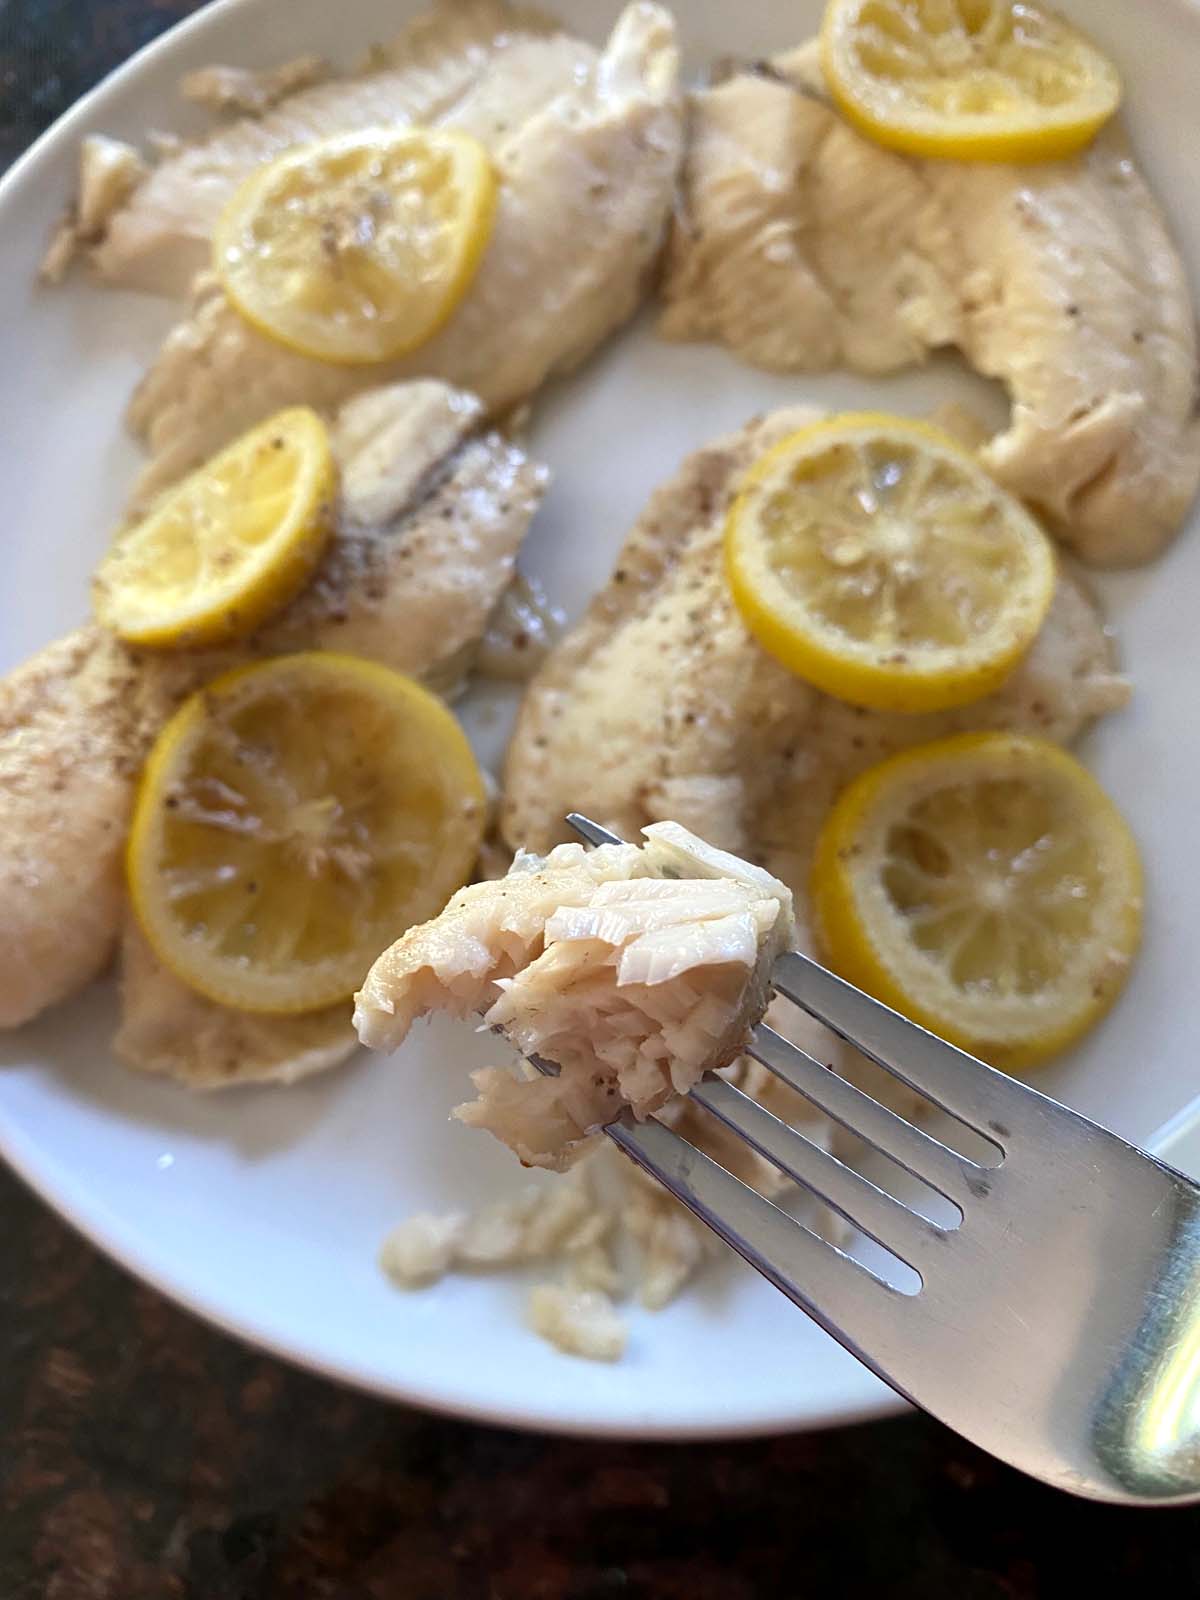 Plate of tilapia with lemon slices and fork showing a piece up close.